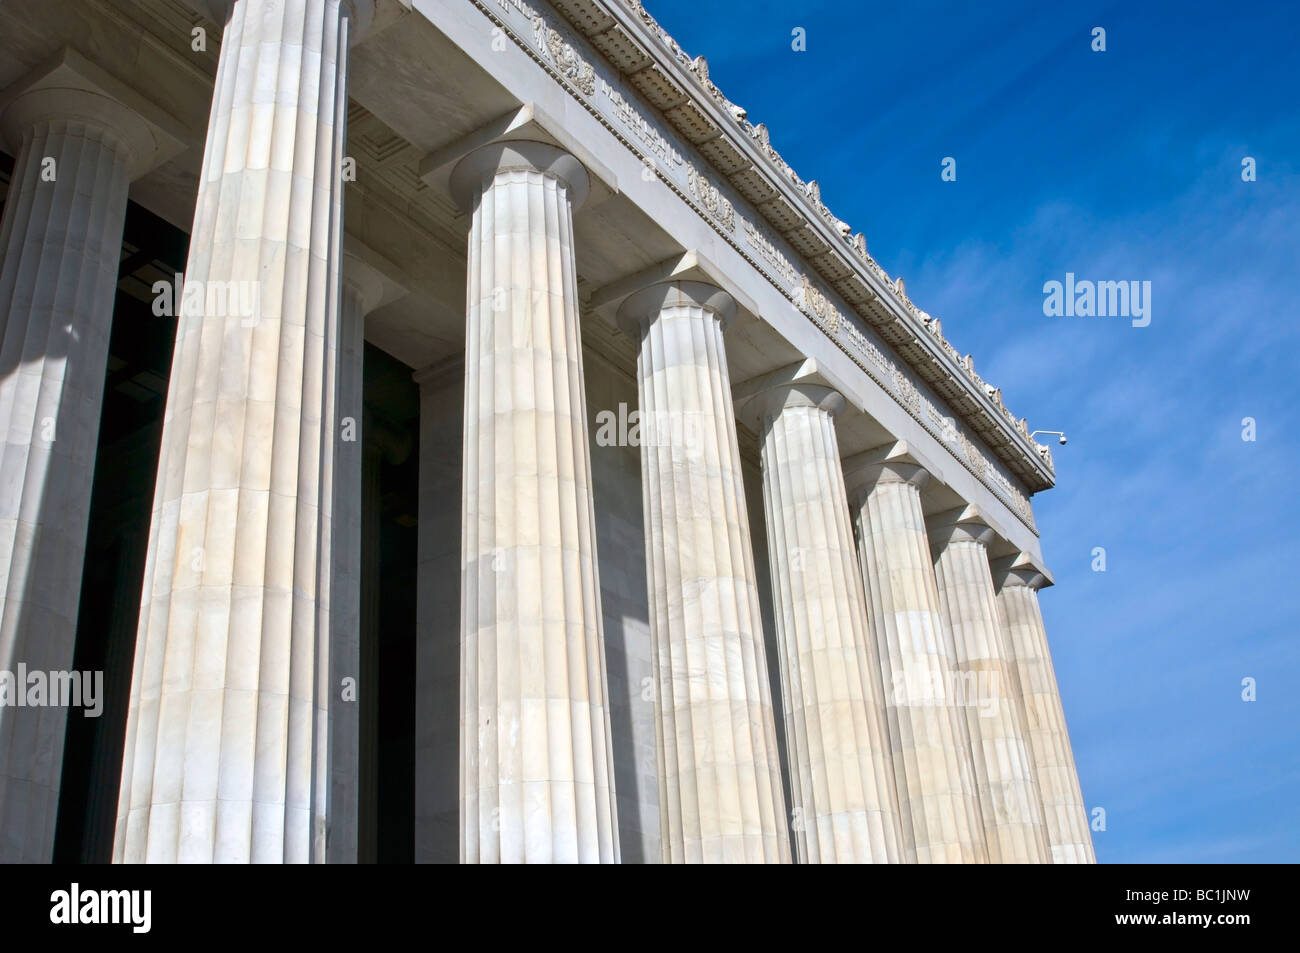 detail of the neoclasical greek columns at the Lincoln Memorial in Washington DC Stock Photo